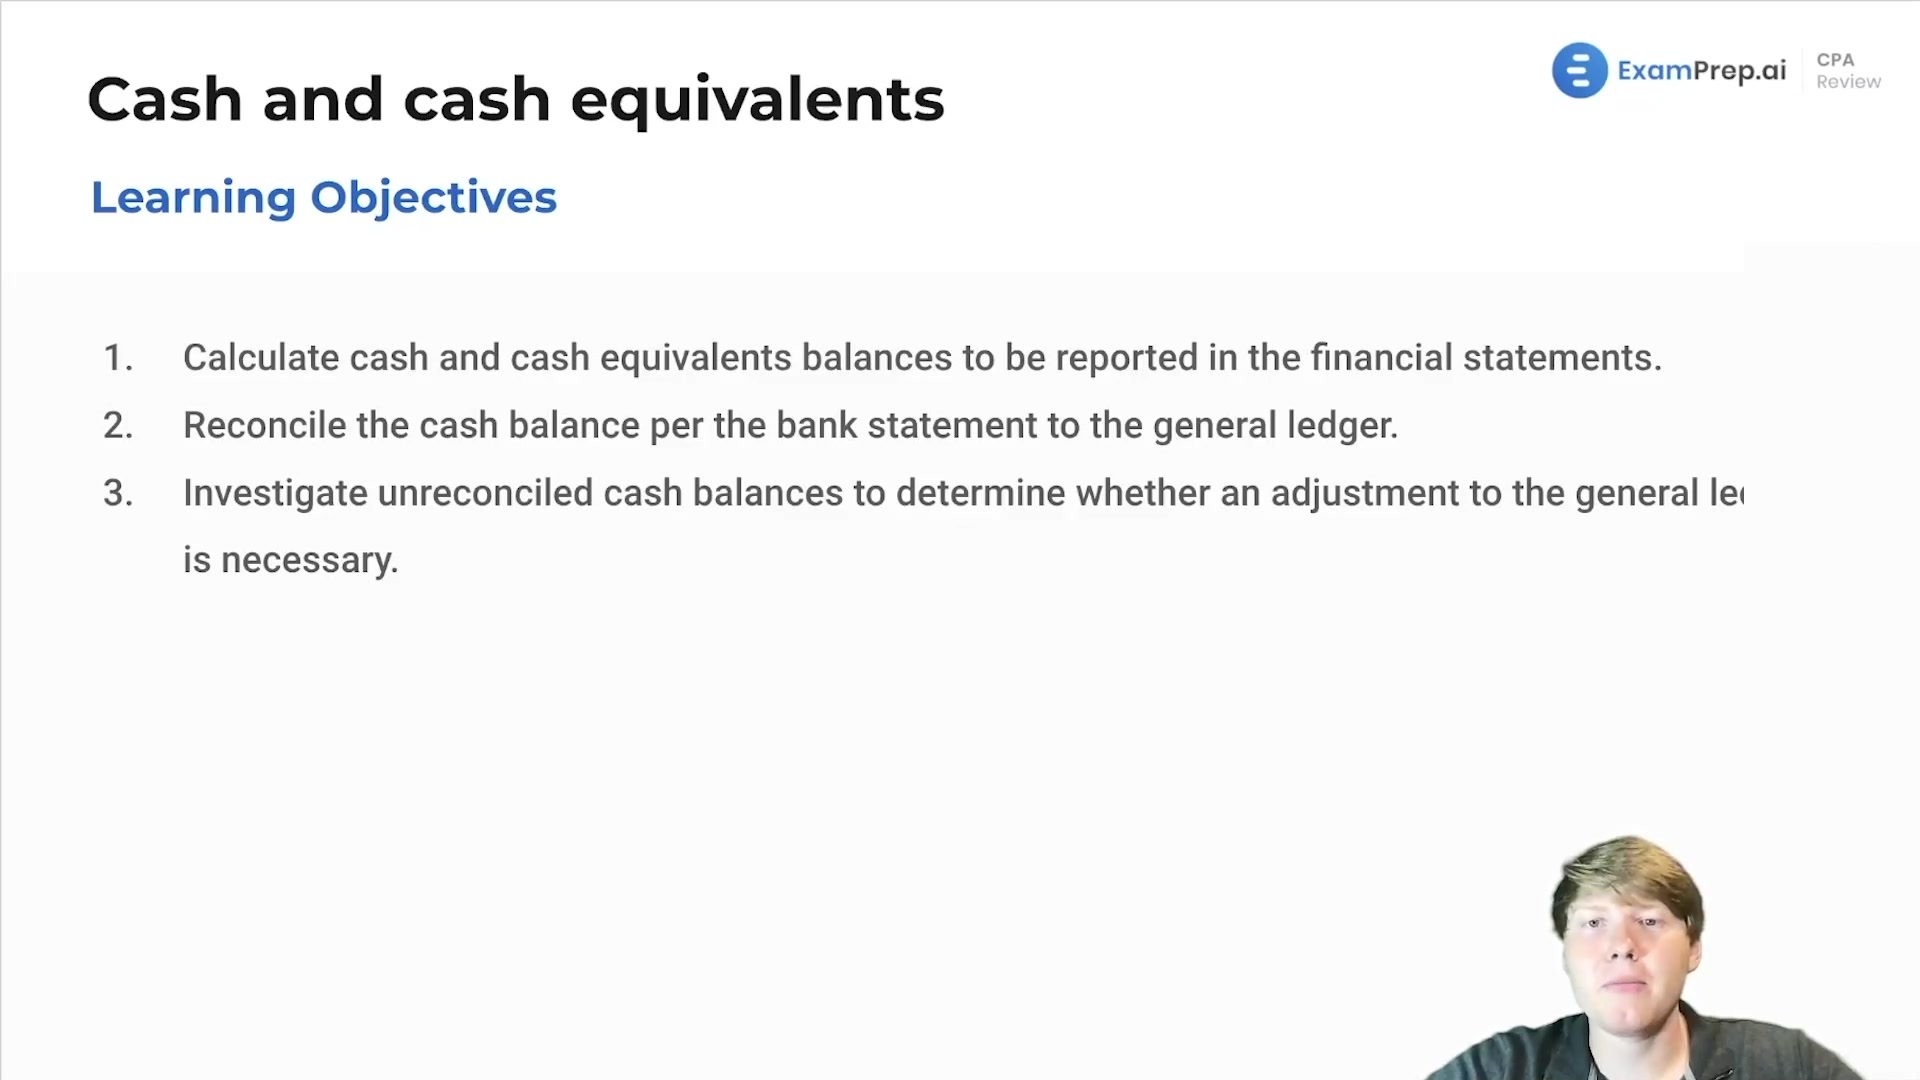 Cash and Cash Equivalents Overview and Objectives lesson thumbnail